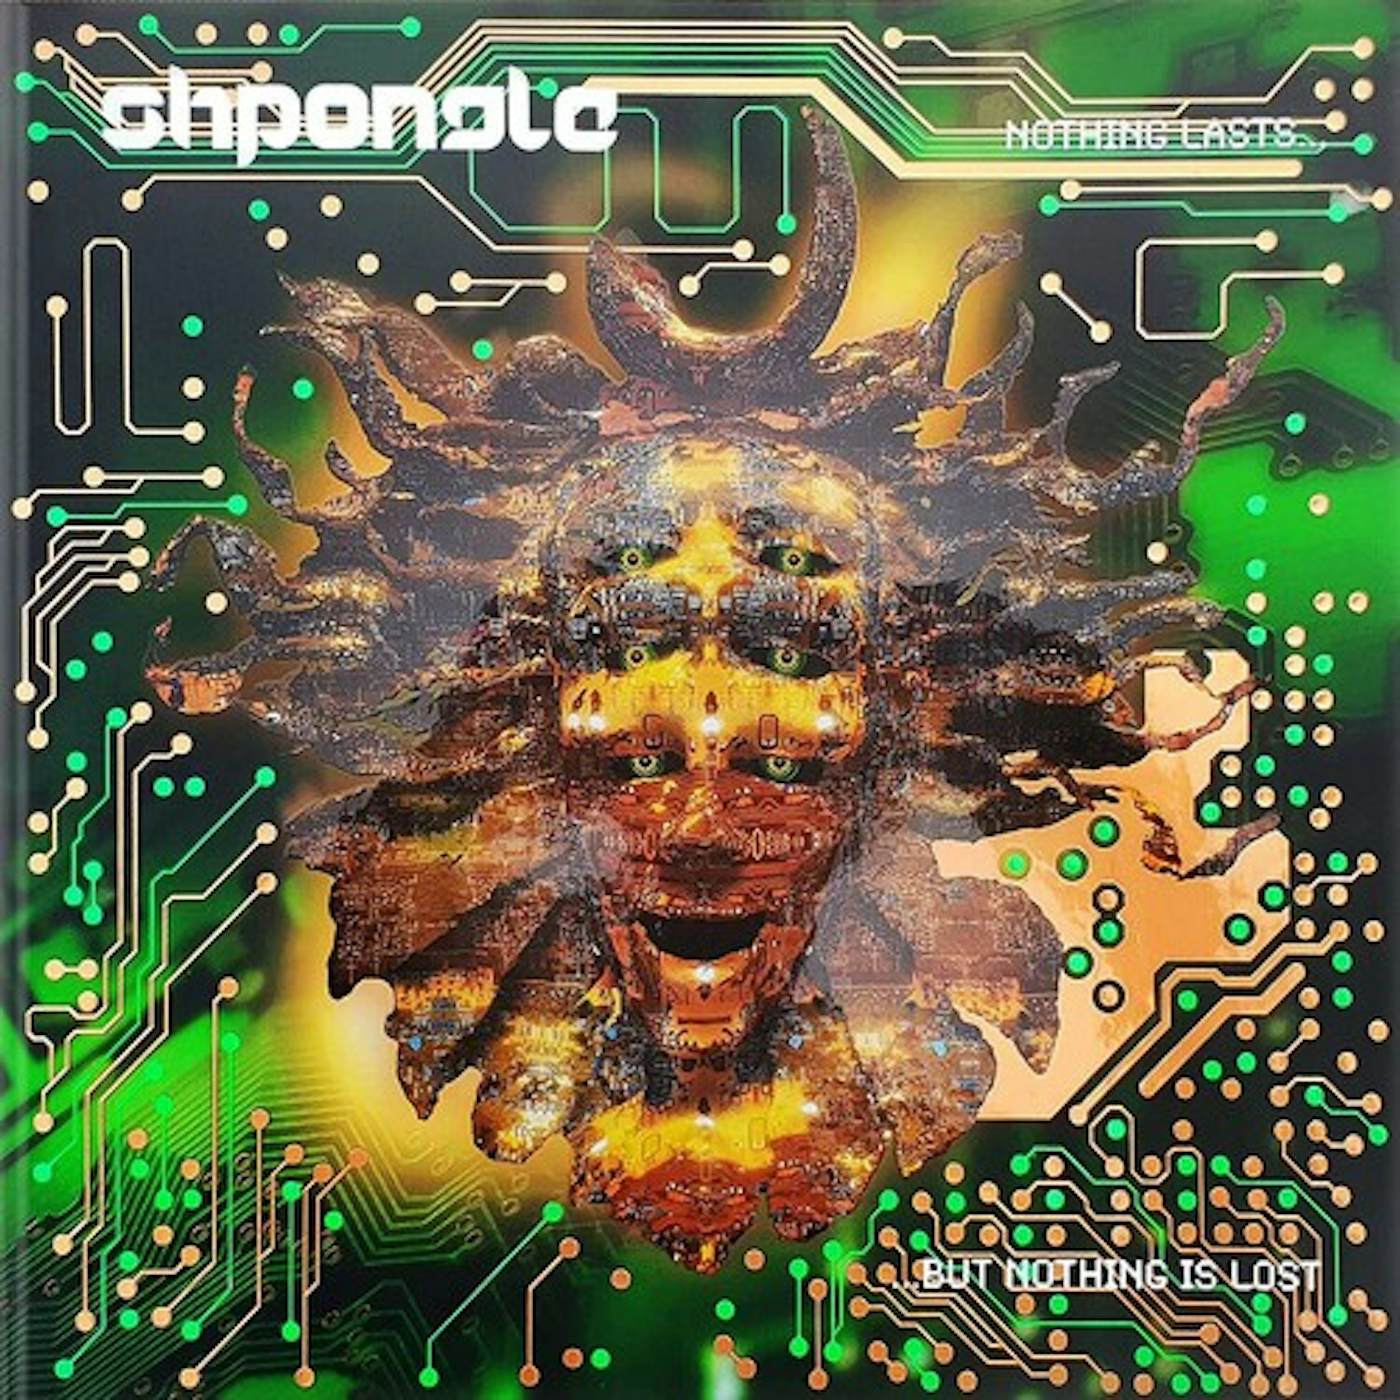 Shpongle NOTHING LASTS BUT NOTHING IS LOST Vinyl Record